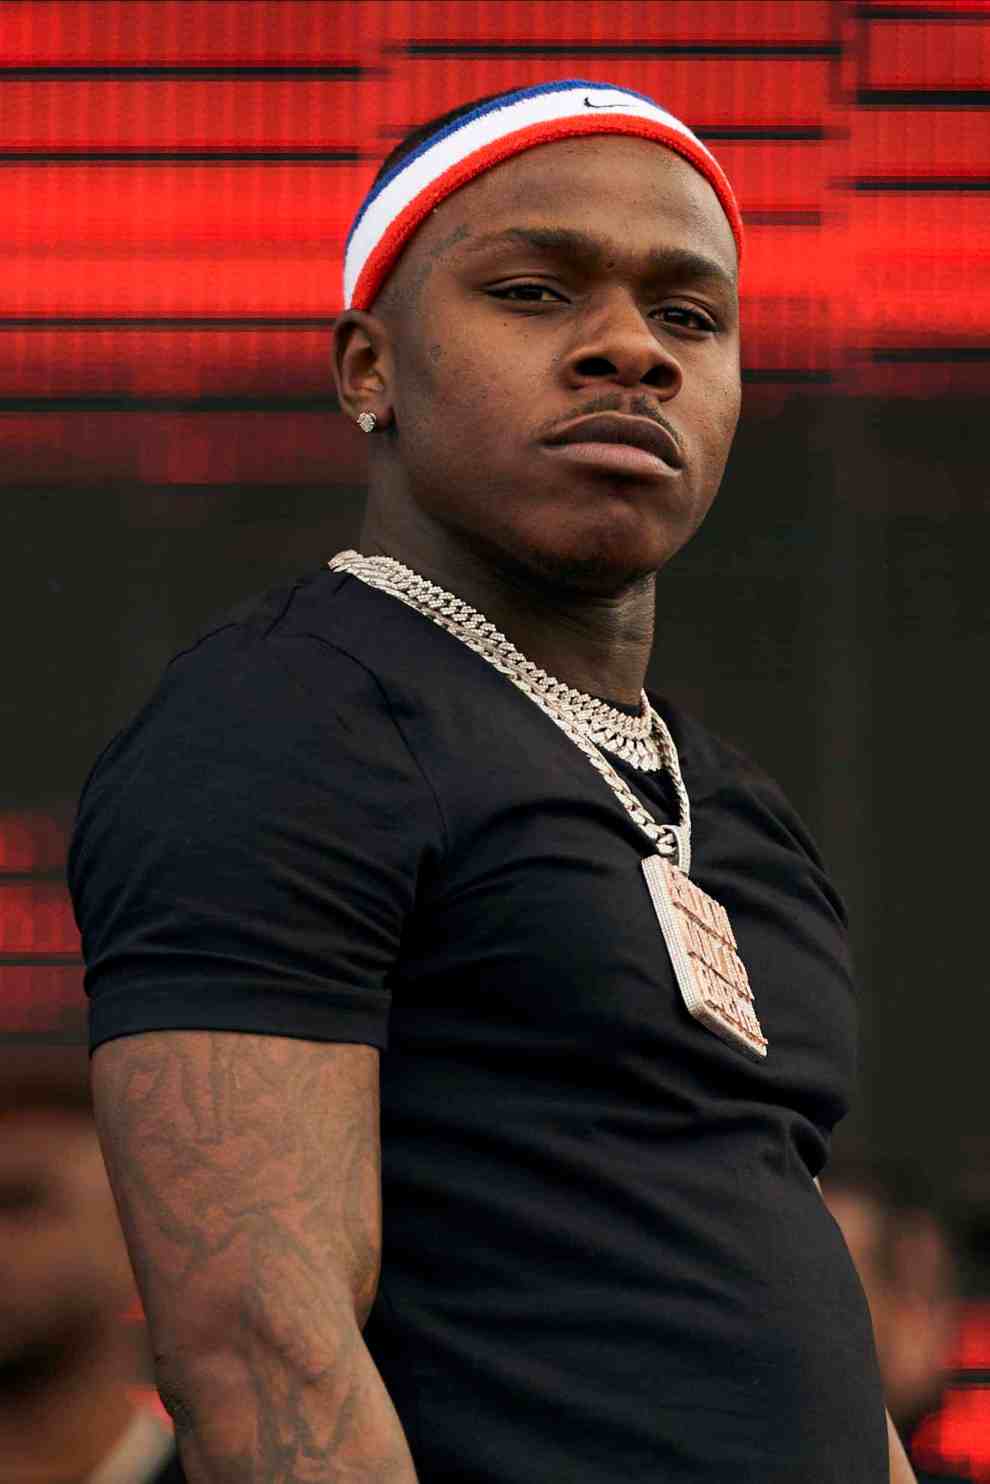 DaBaby wearing black shirt on stage